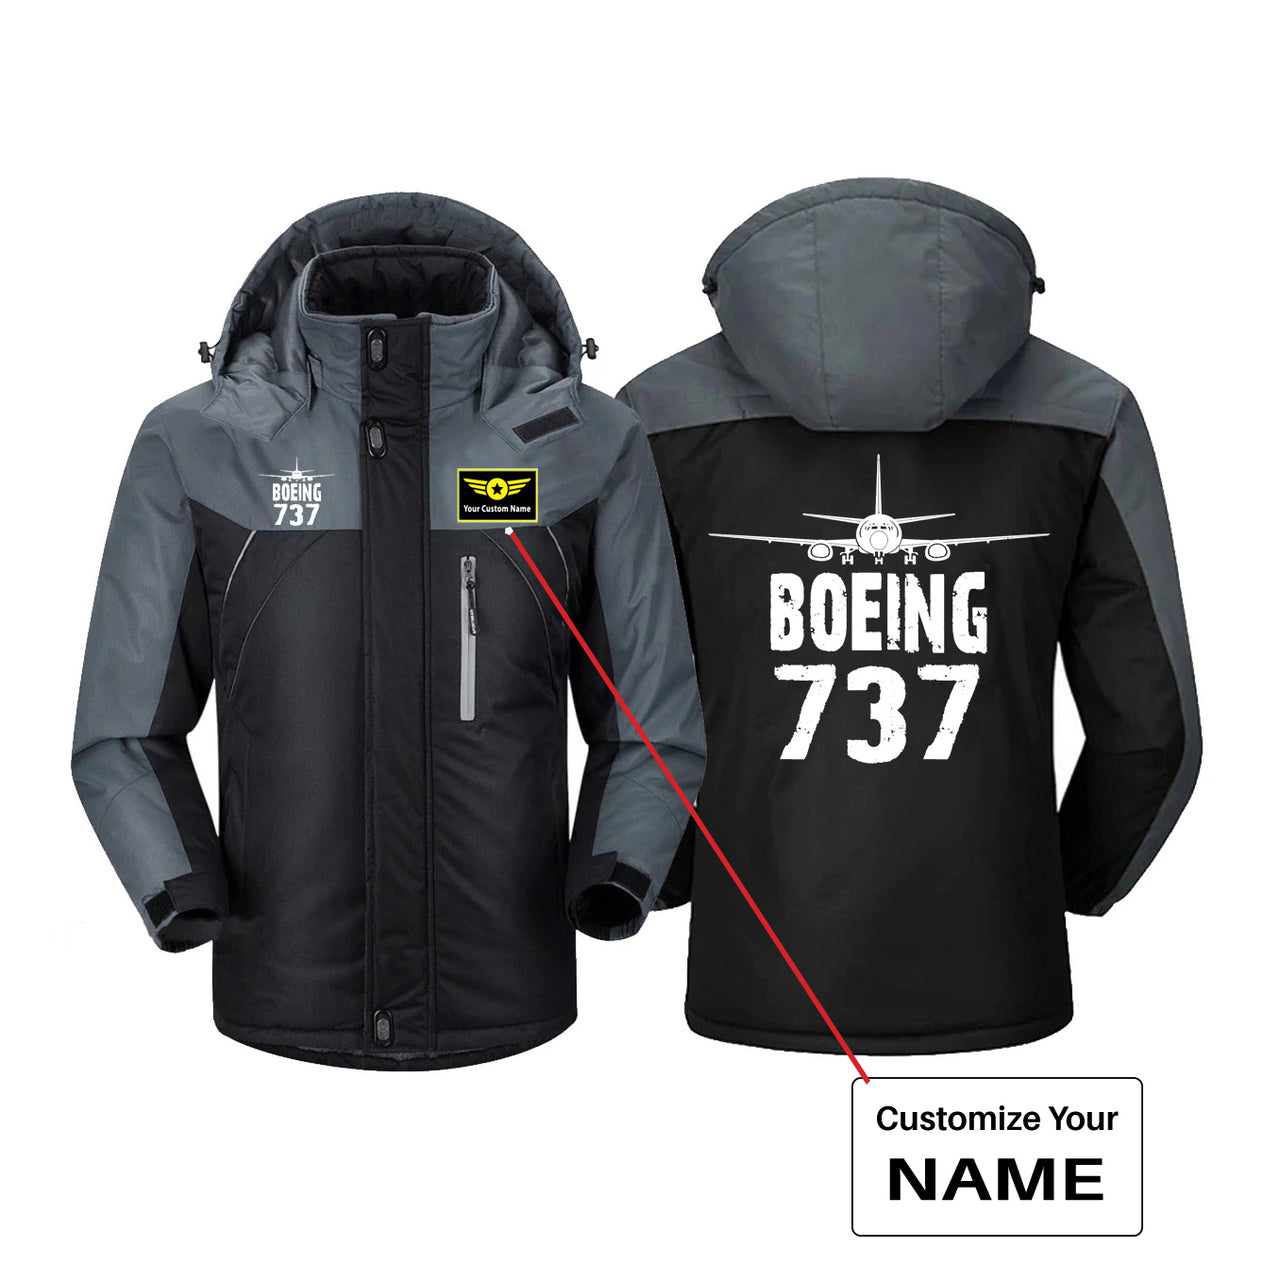 Boeing 737 & Plane Designed Thick Winter Jackets